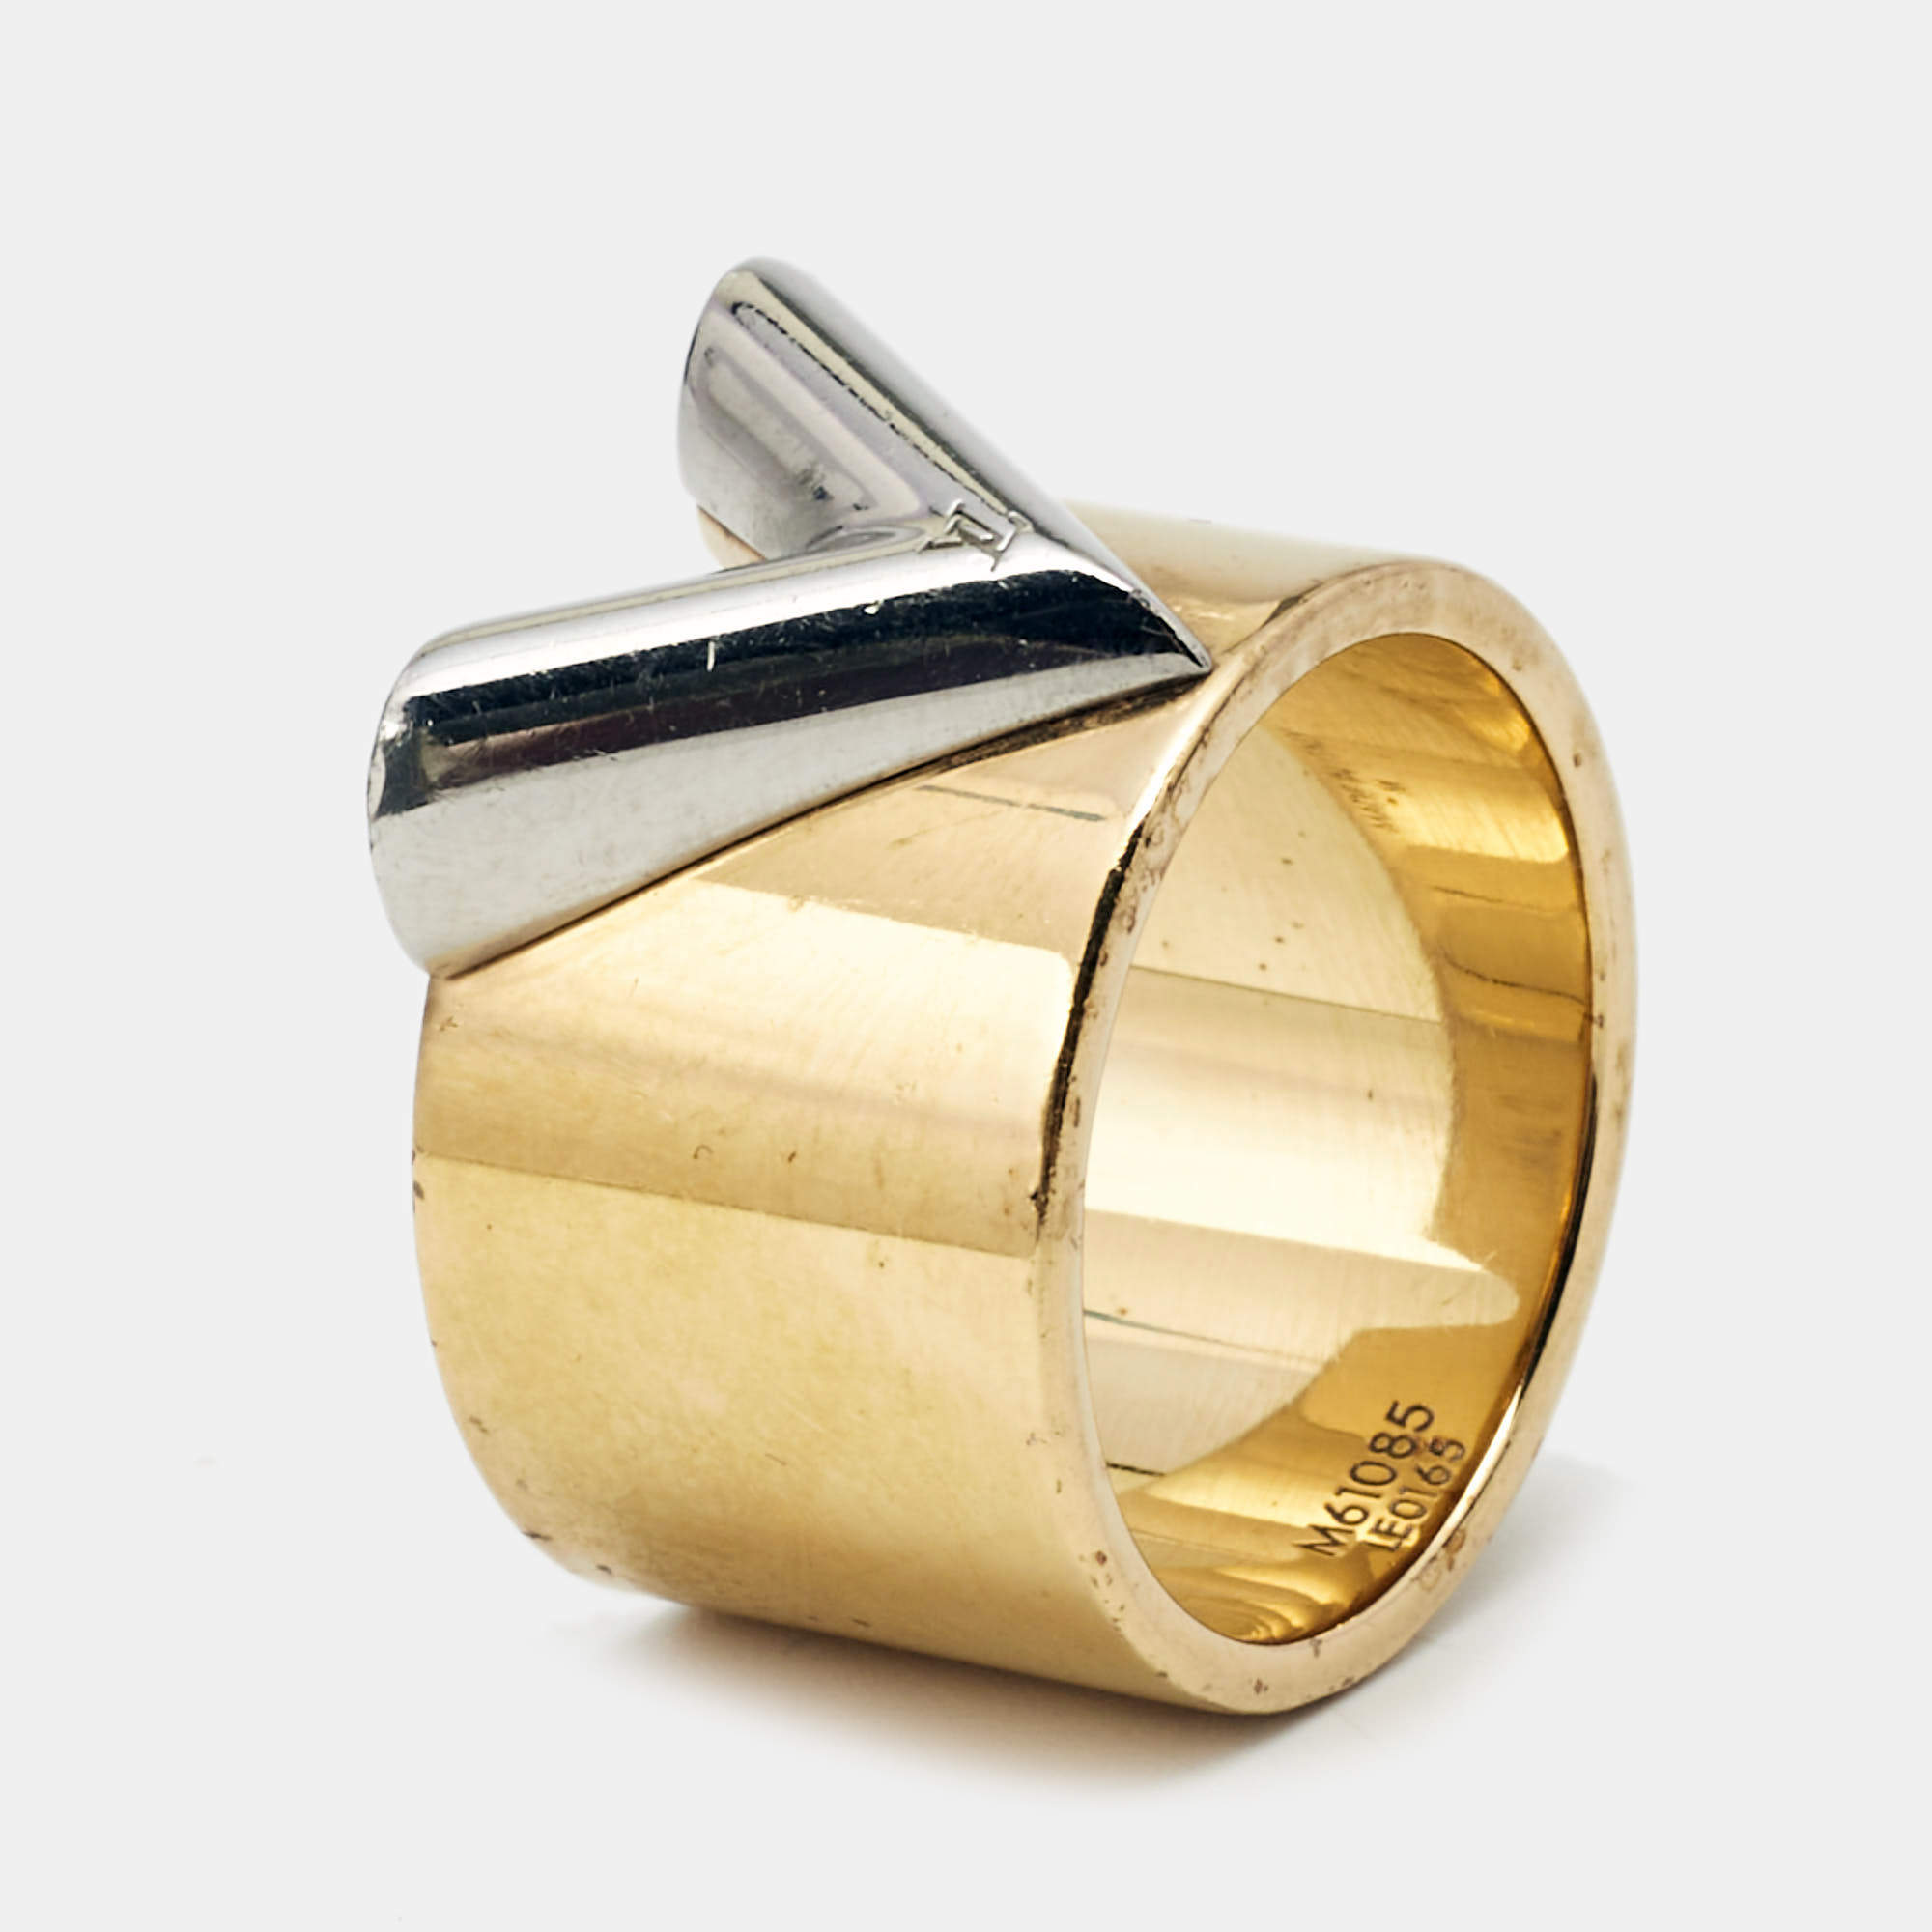 Louis Vuitton Essential V Ring - Gold-Tone Metal Band, Rings - LOU768992